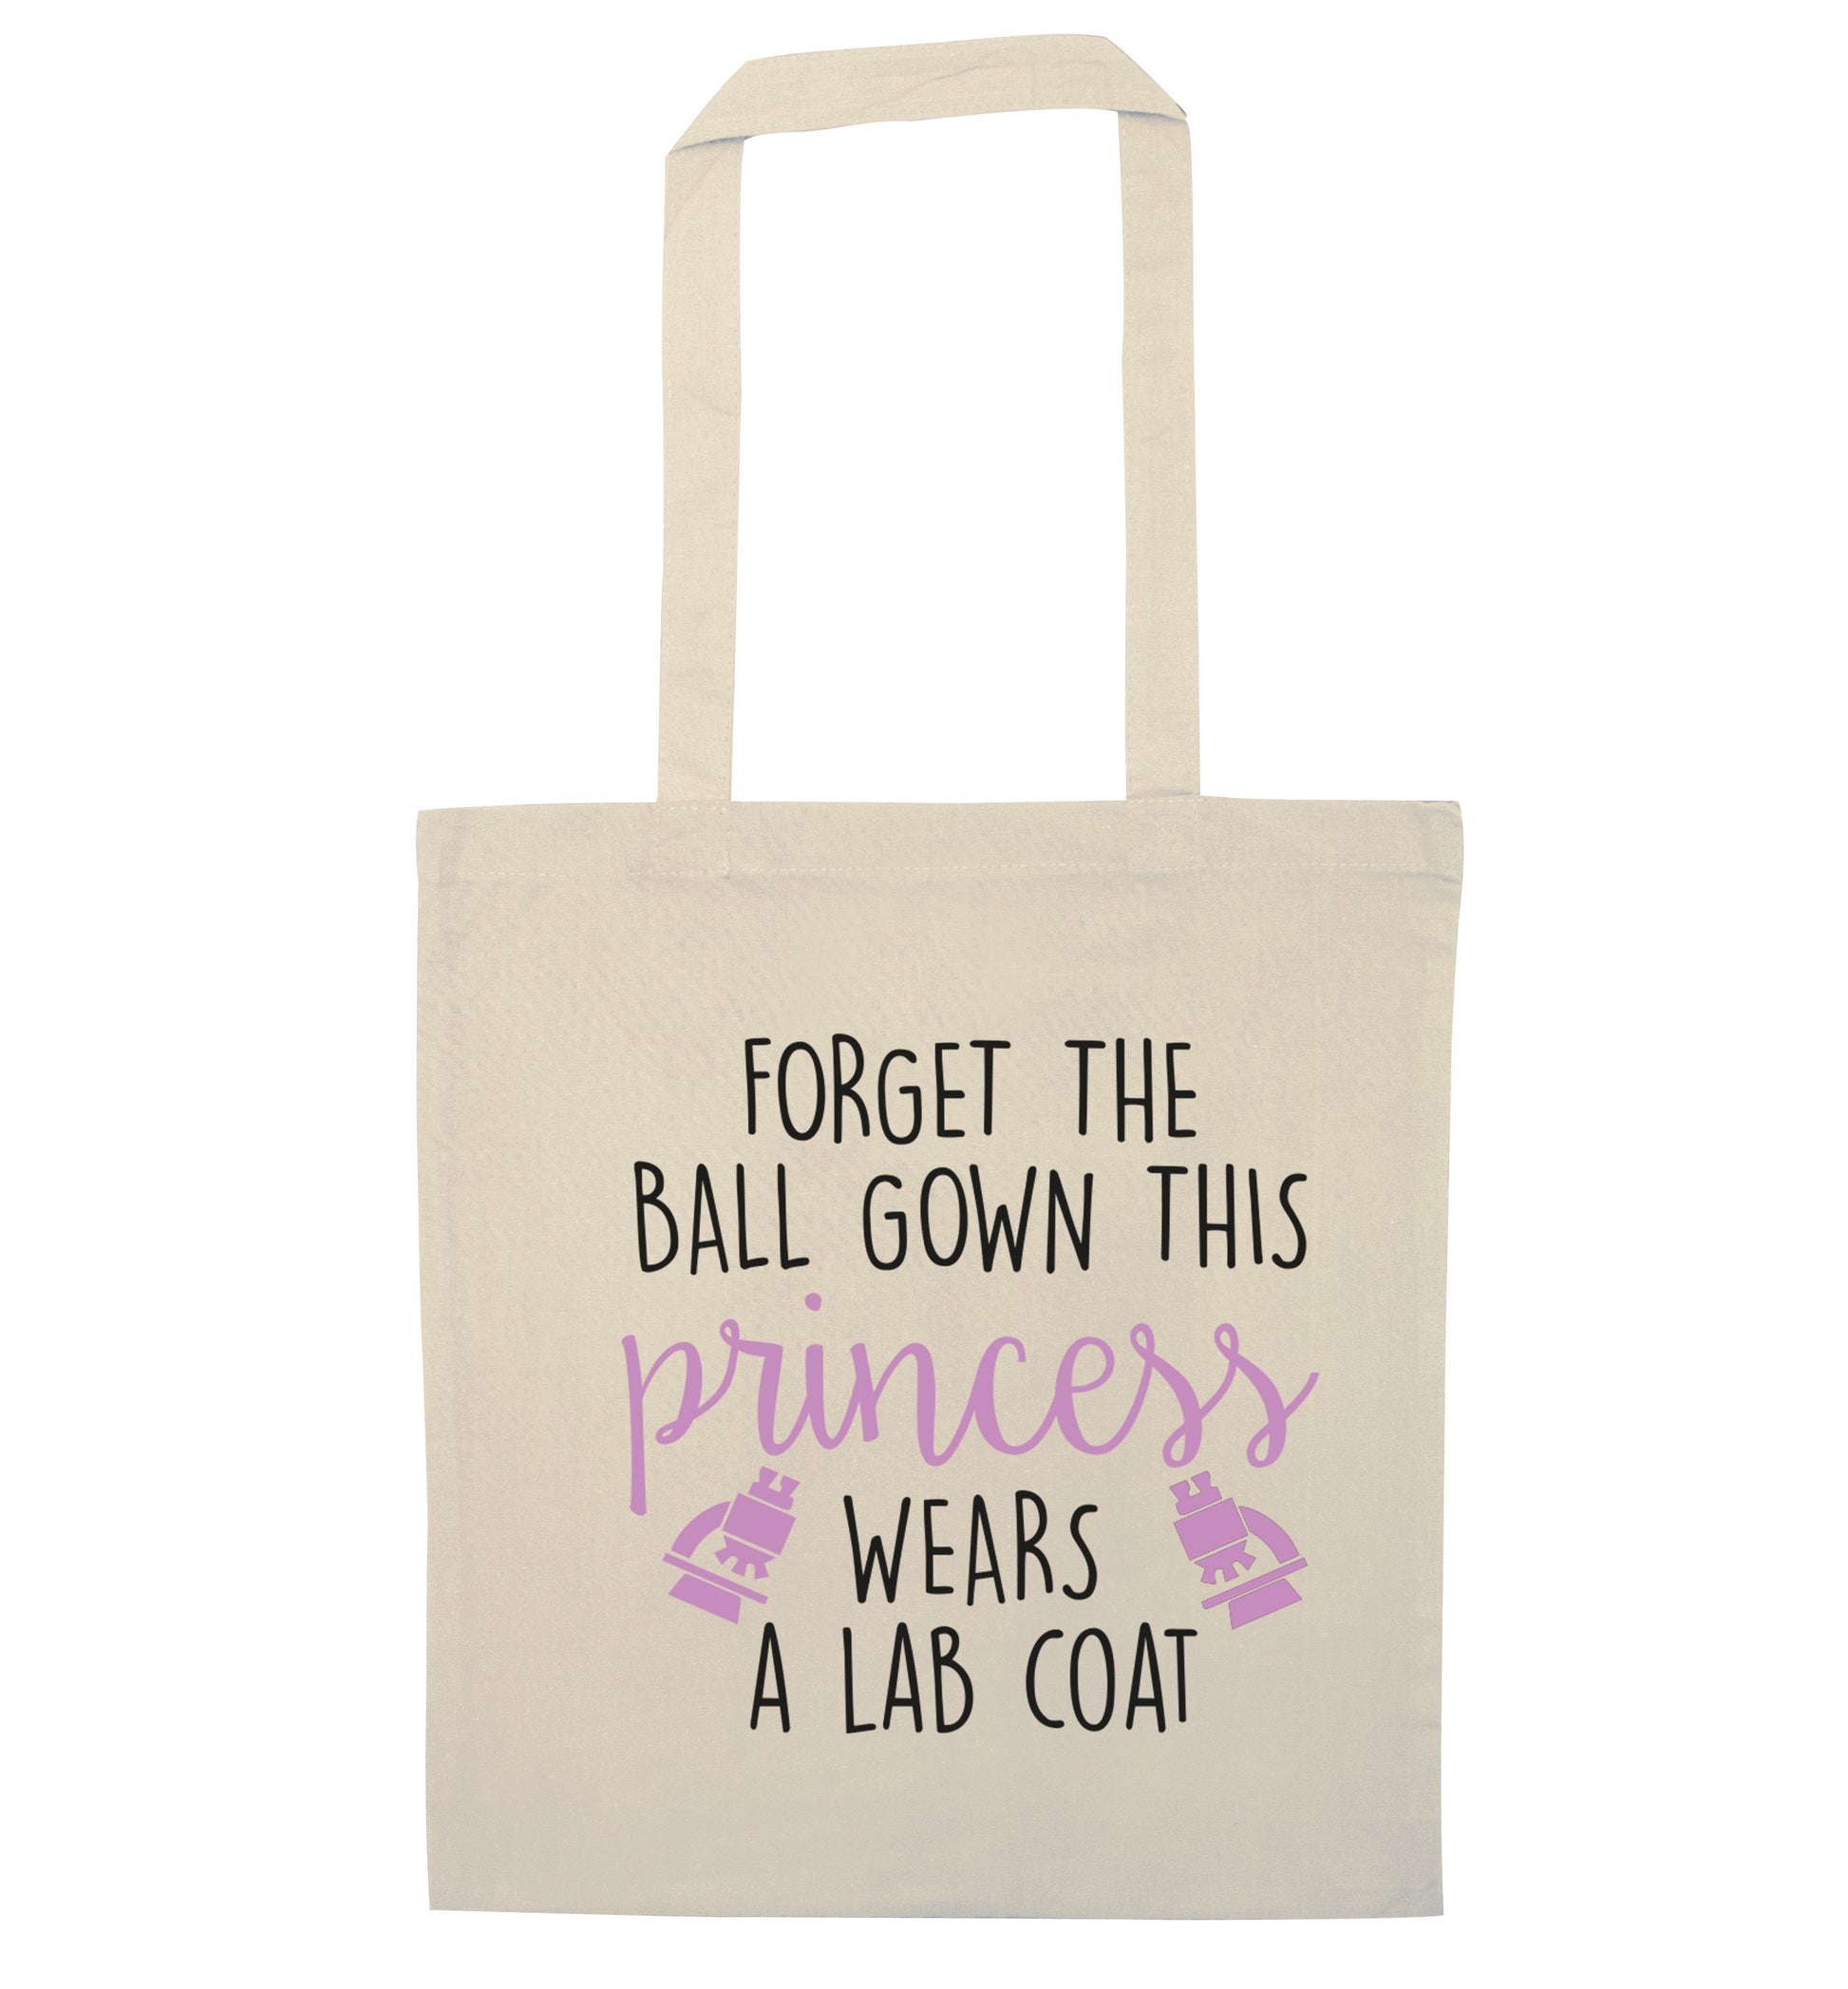 Forget the ball gown this princess wears a lab coat natural tote bag